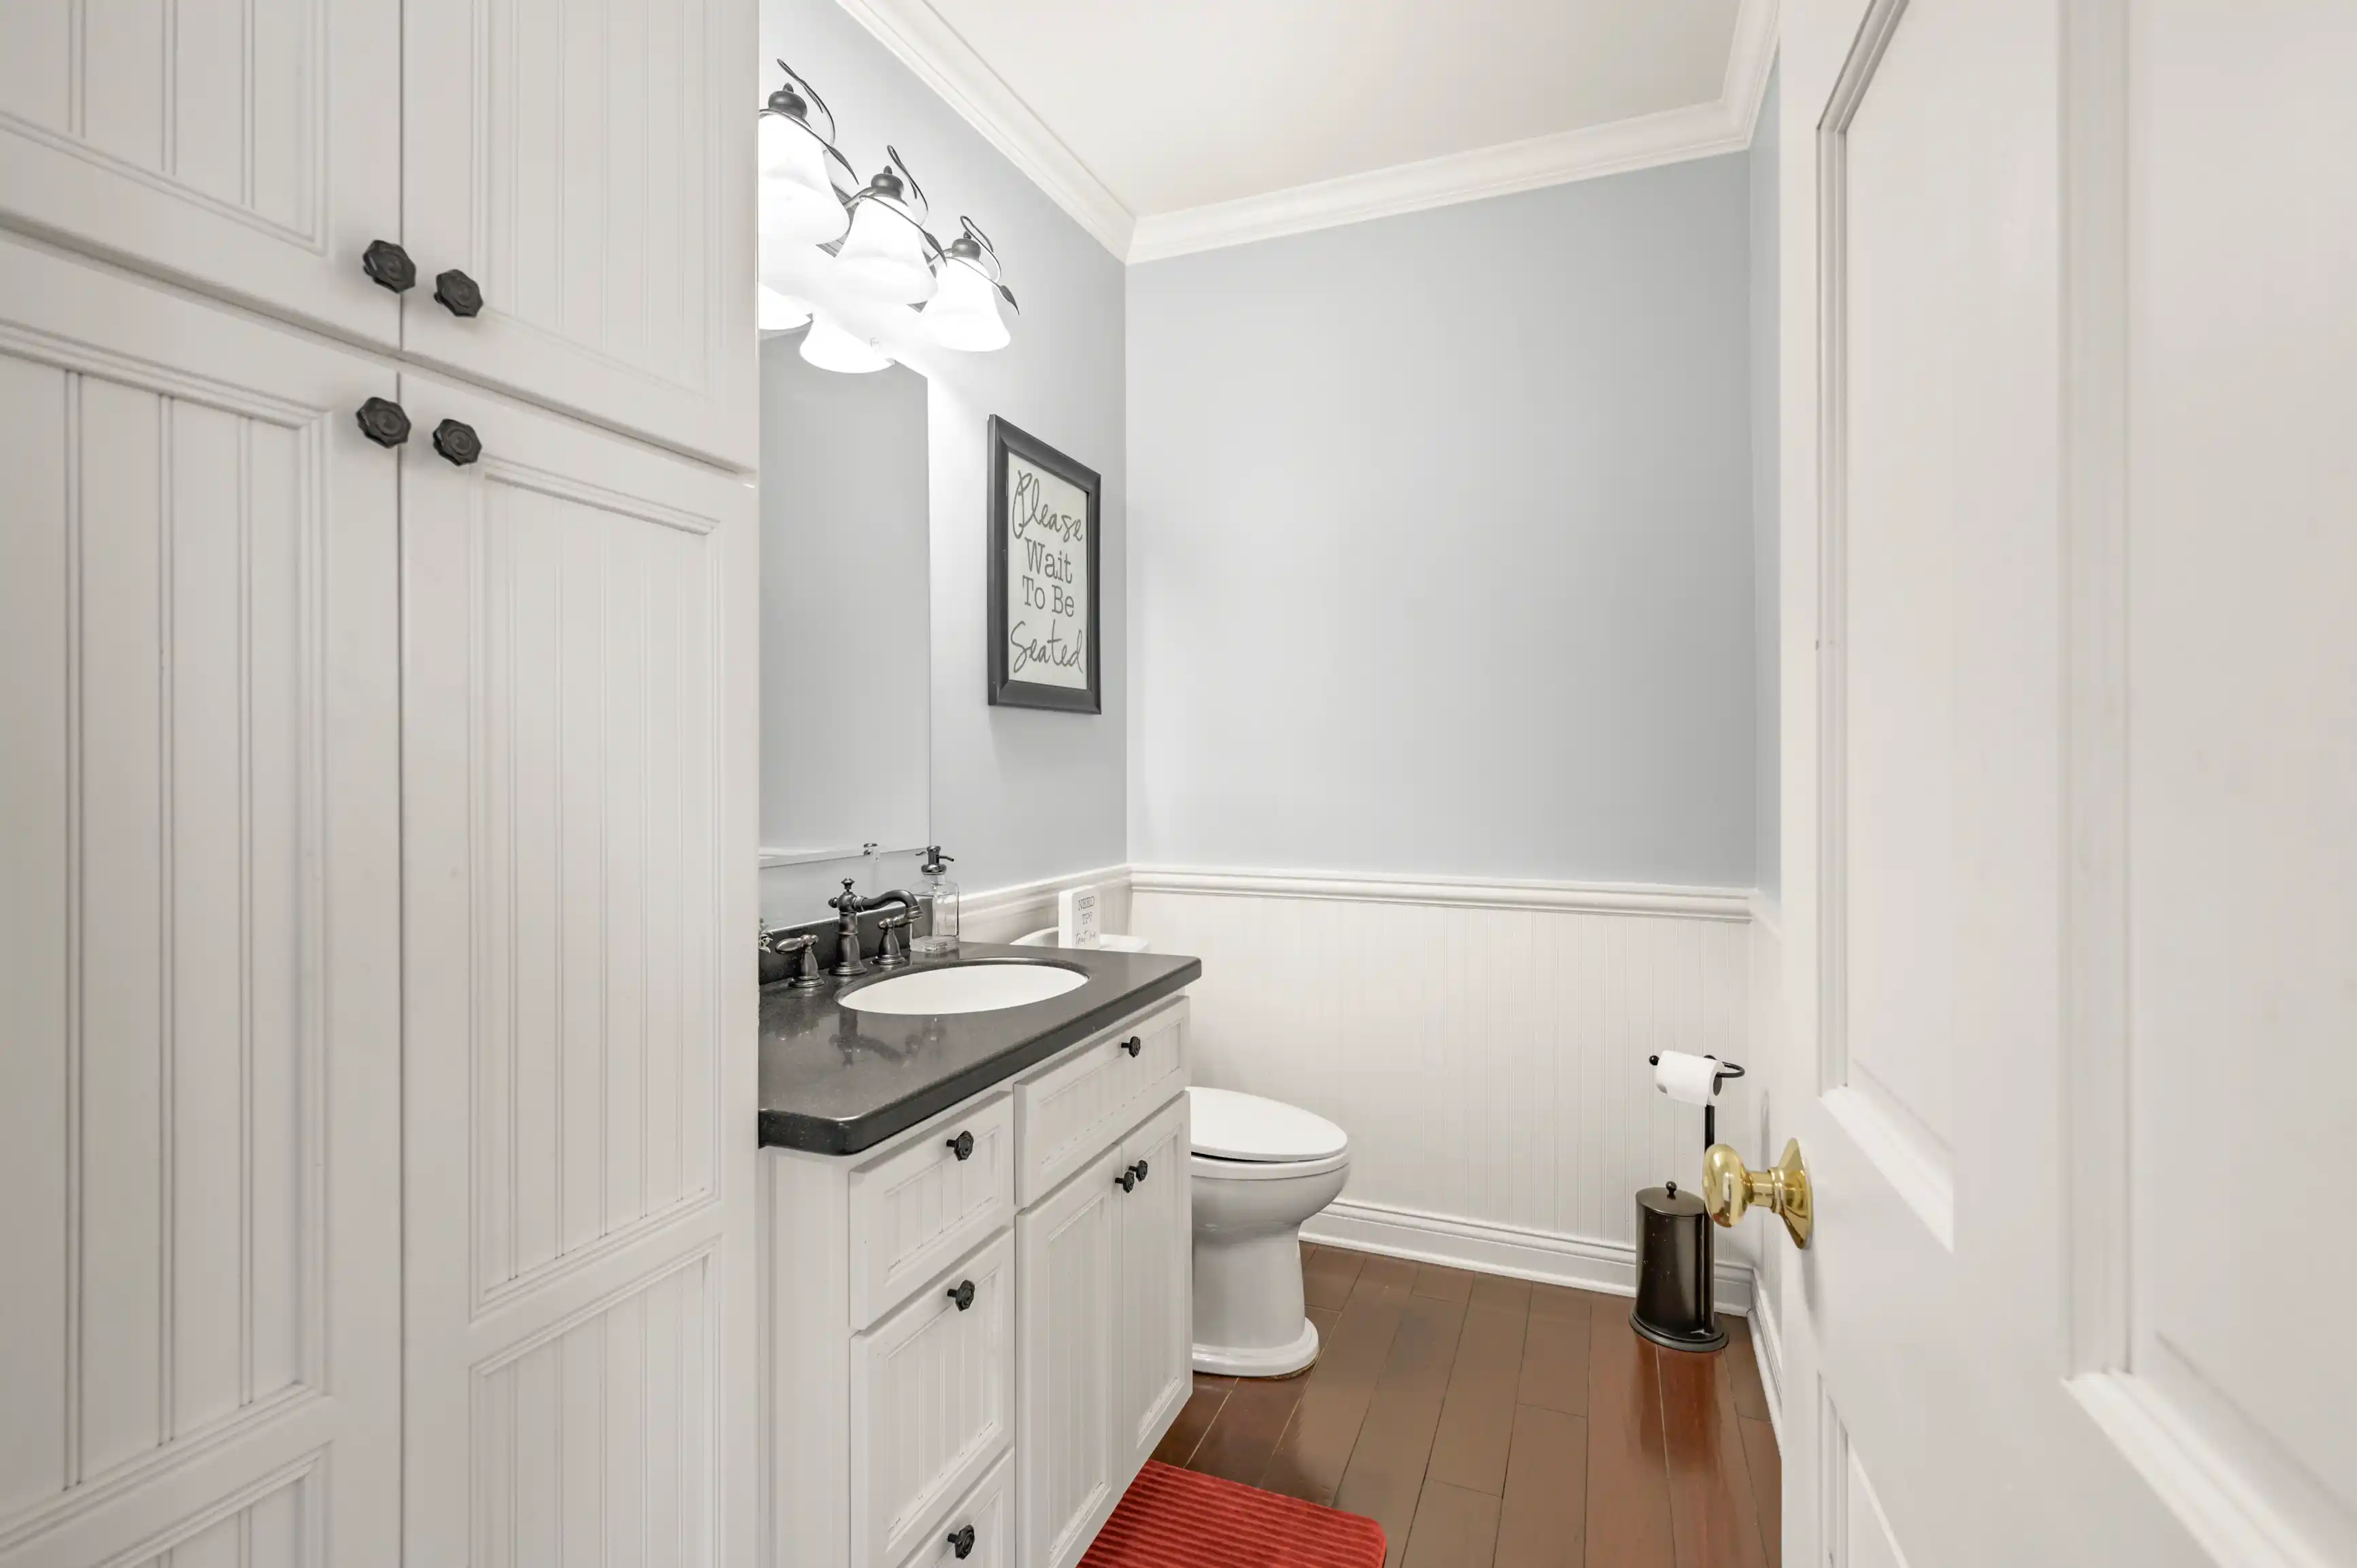 Interior of a clean bathroom with white cabinetry, a black countertop, an oval mirror, sconce lighting, and a decorative sign on the wall.